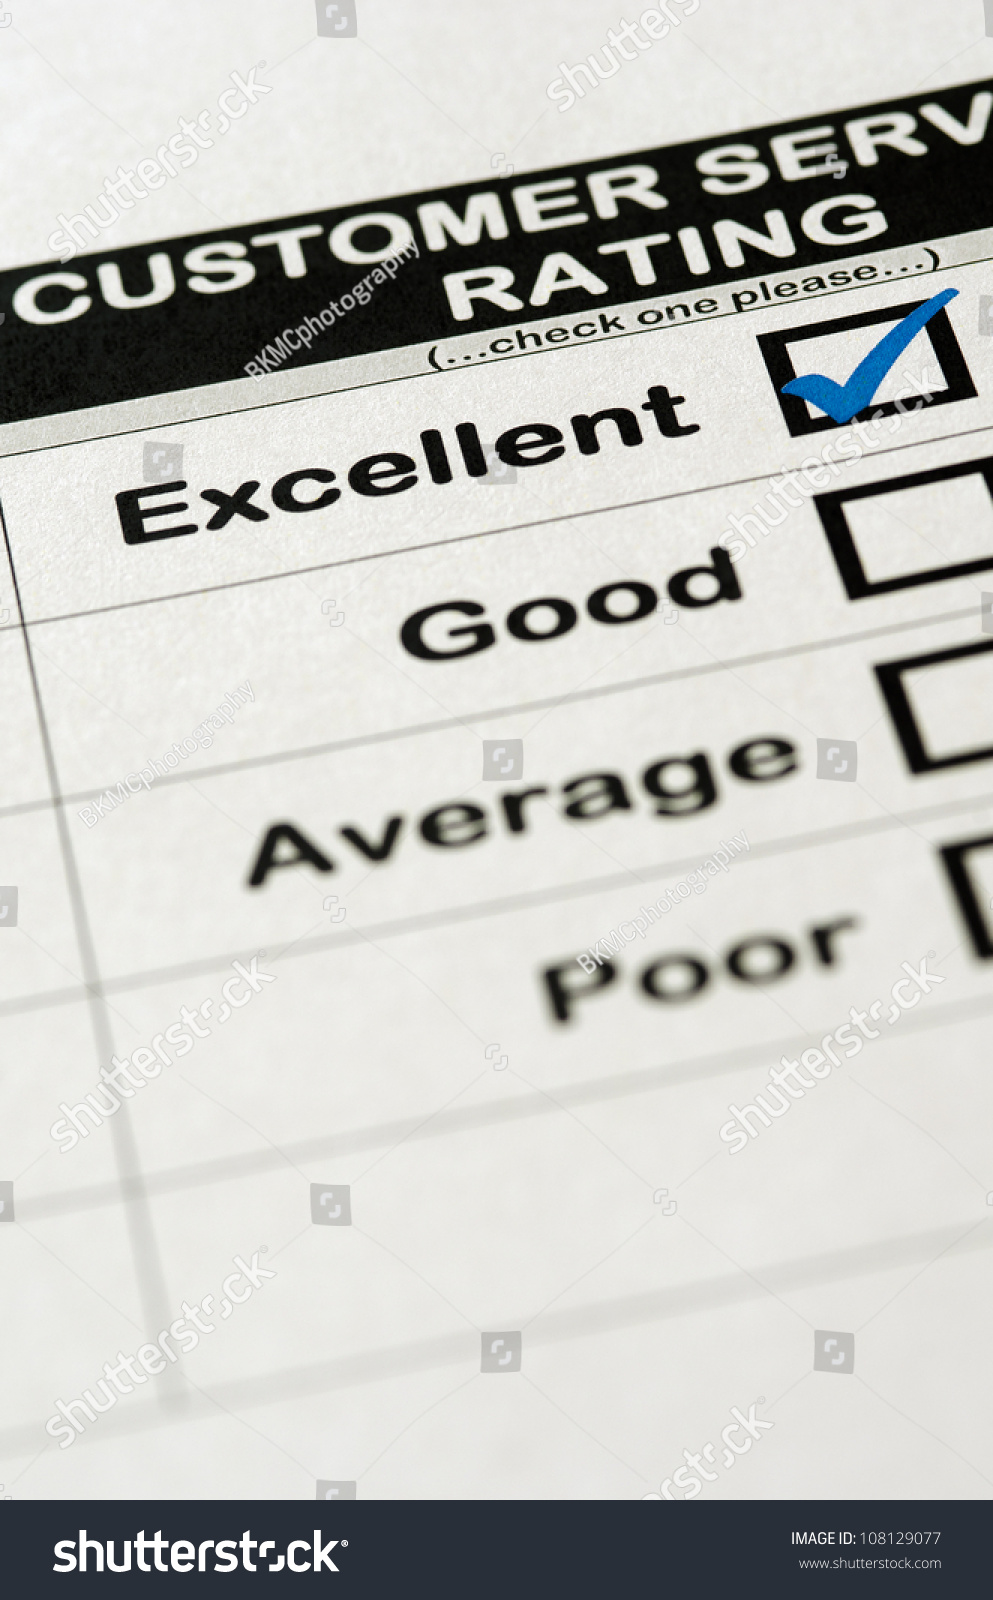 Customer Service Survey With Excellent Rating Chosen #108129077